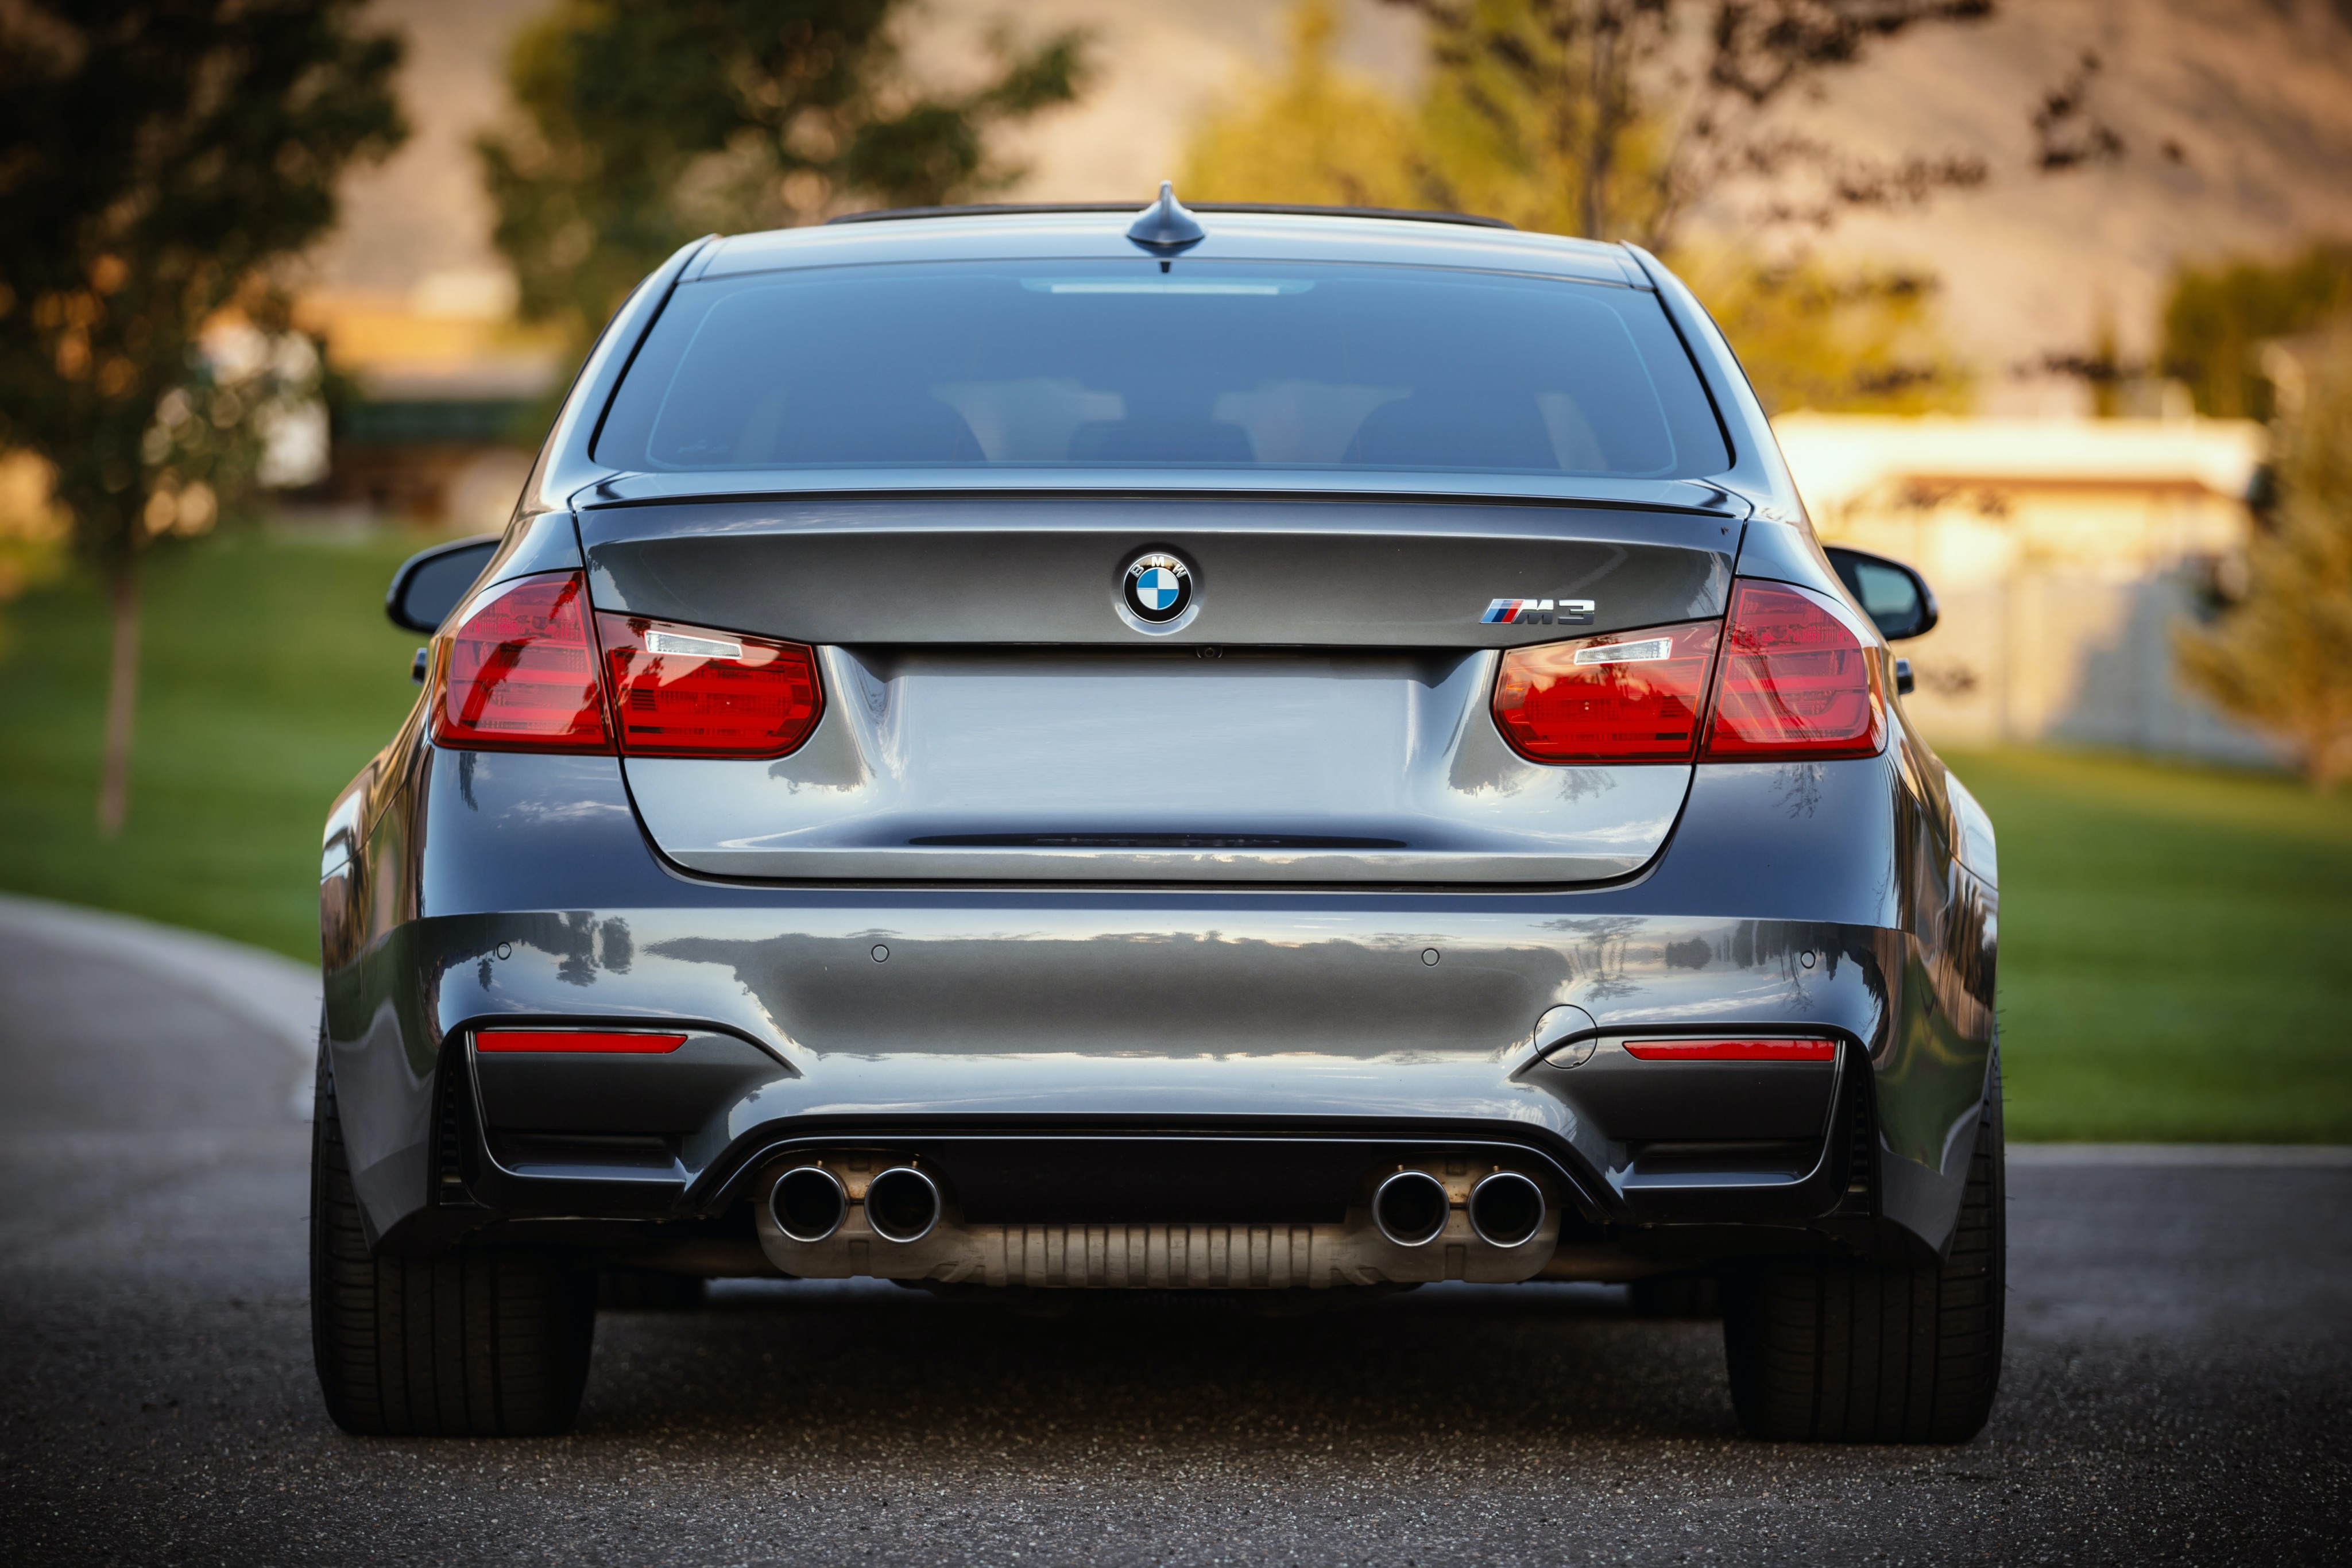 Your BMW Repair Specialist Shares Their Top Maintenance & Service Tips